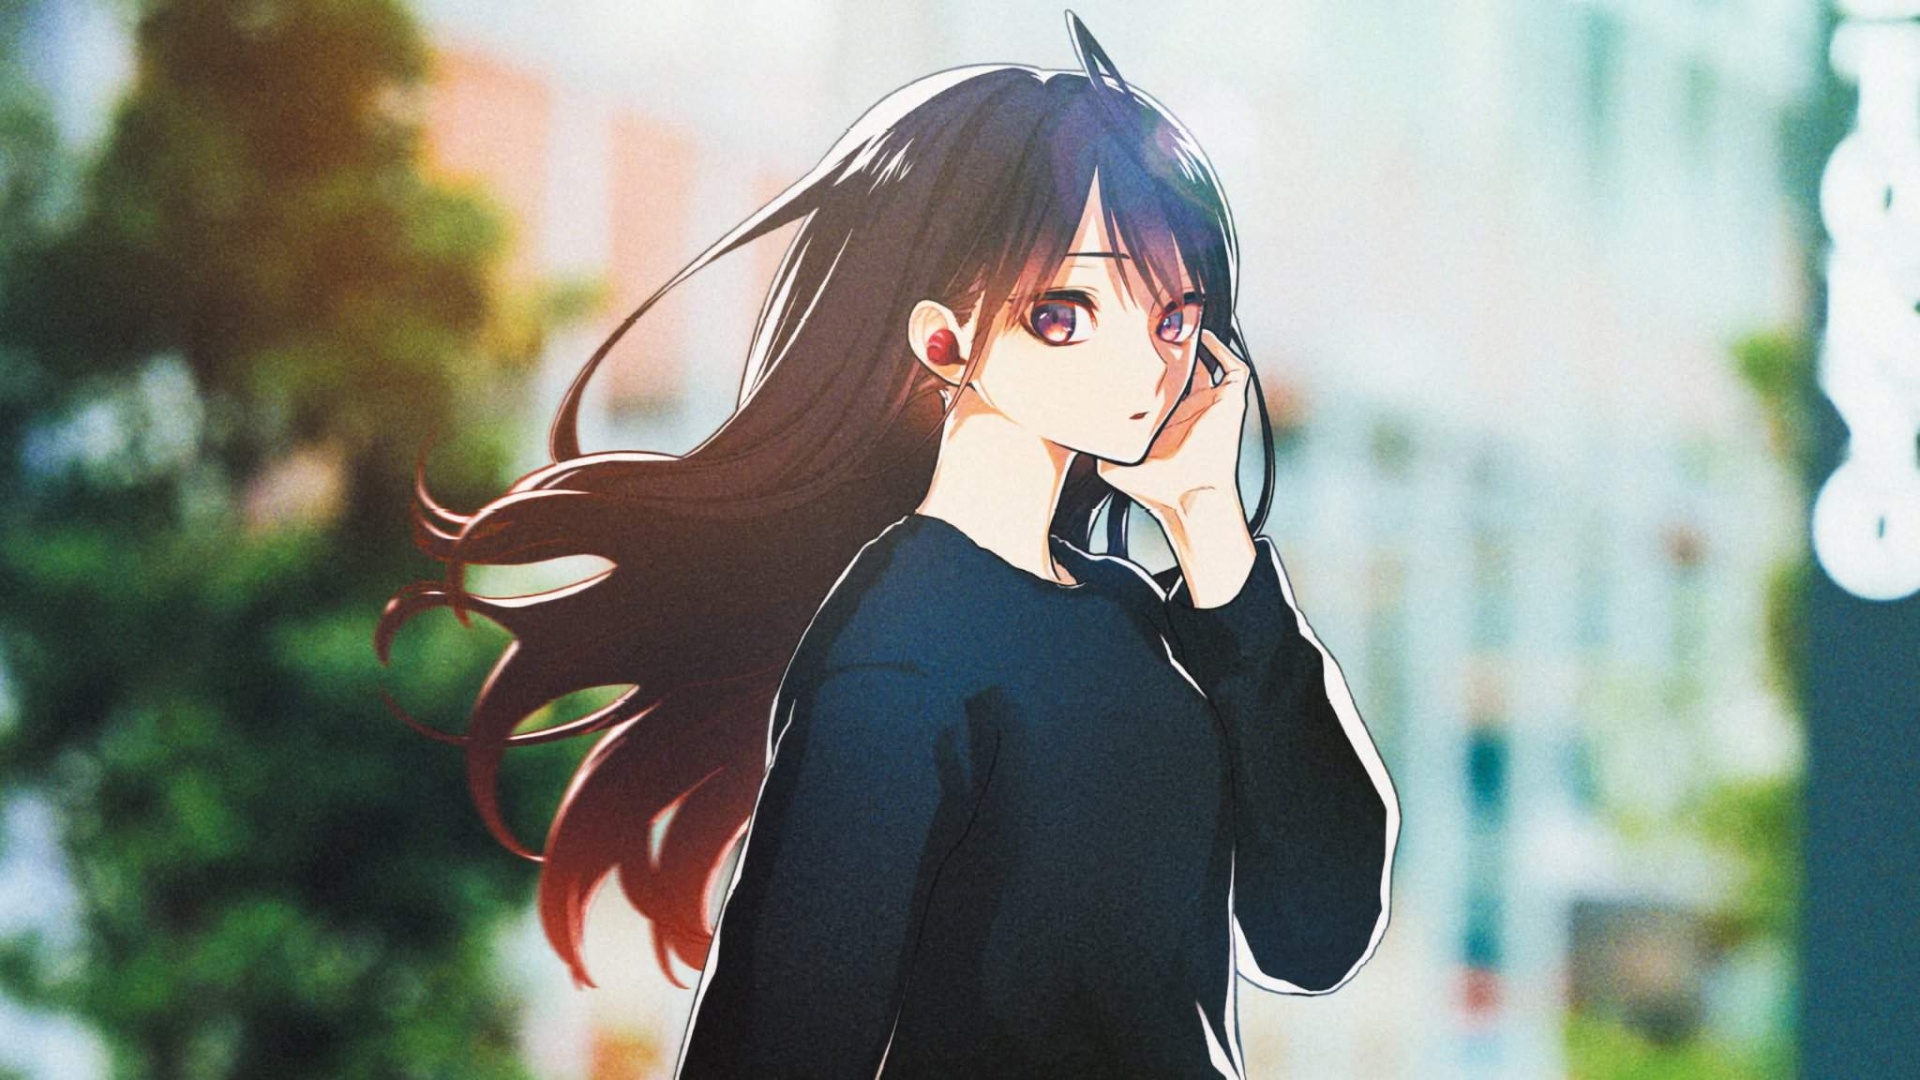 Anime Thoughtful Girl best background